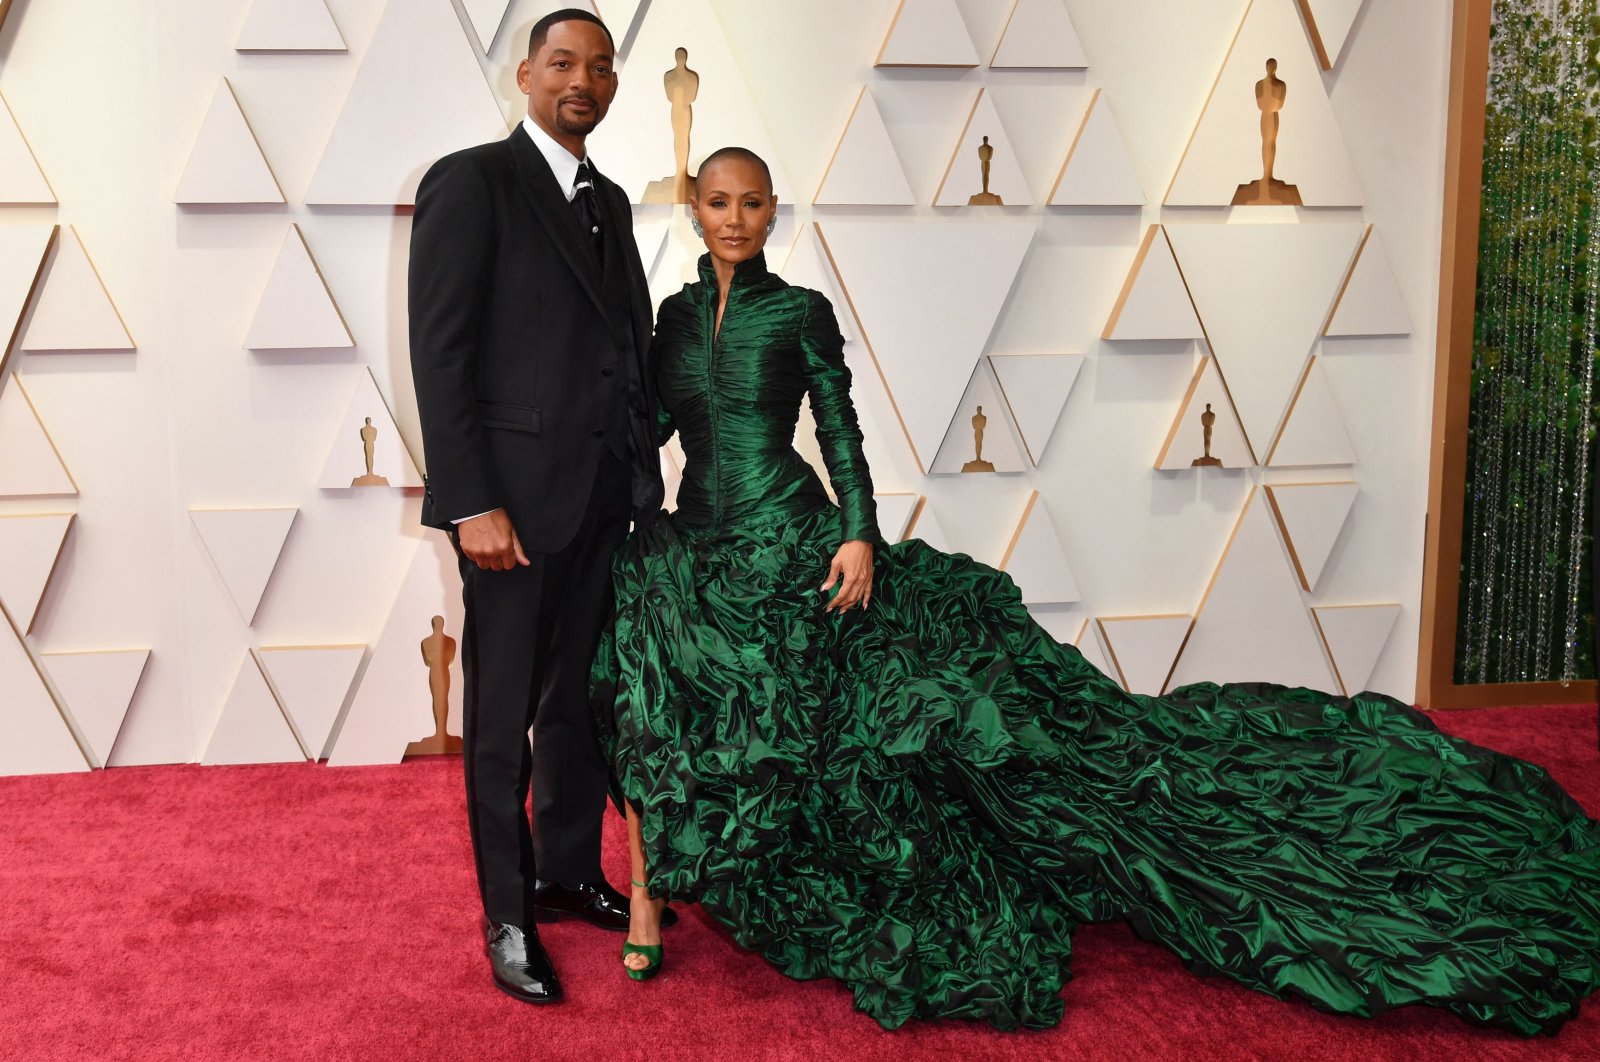 U.S. actor Will Smith(L) and Jada Pinkett Smith attend the 94th Oscars at the Dolby Theatre in Hollywood, California, U.S., March 27, 2022. (AFP Photo)